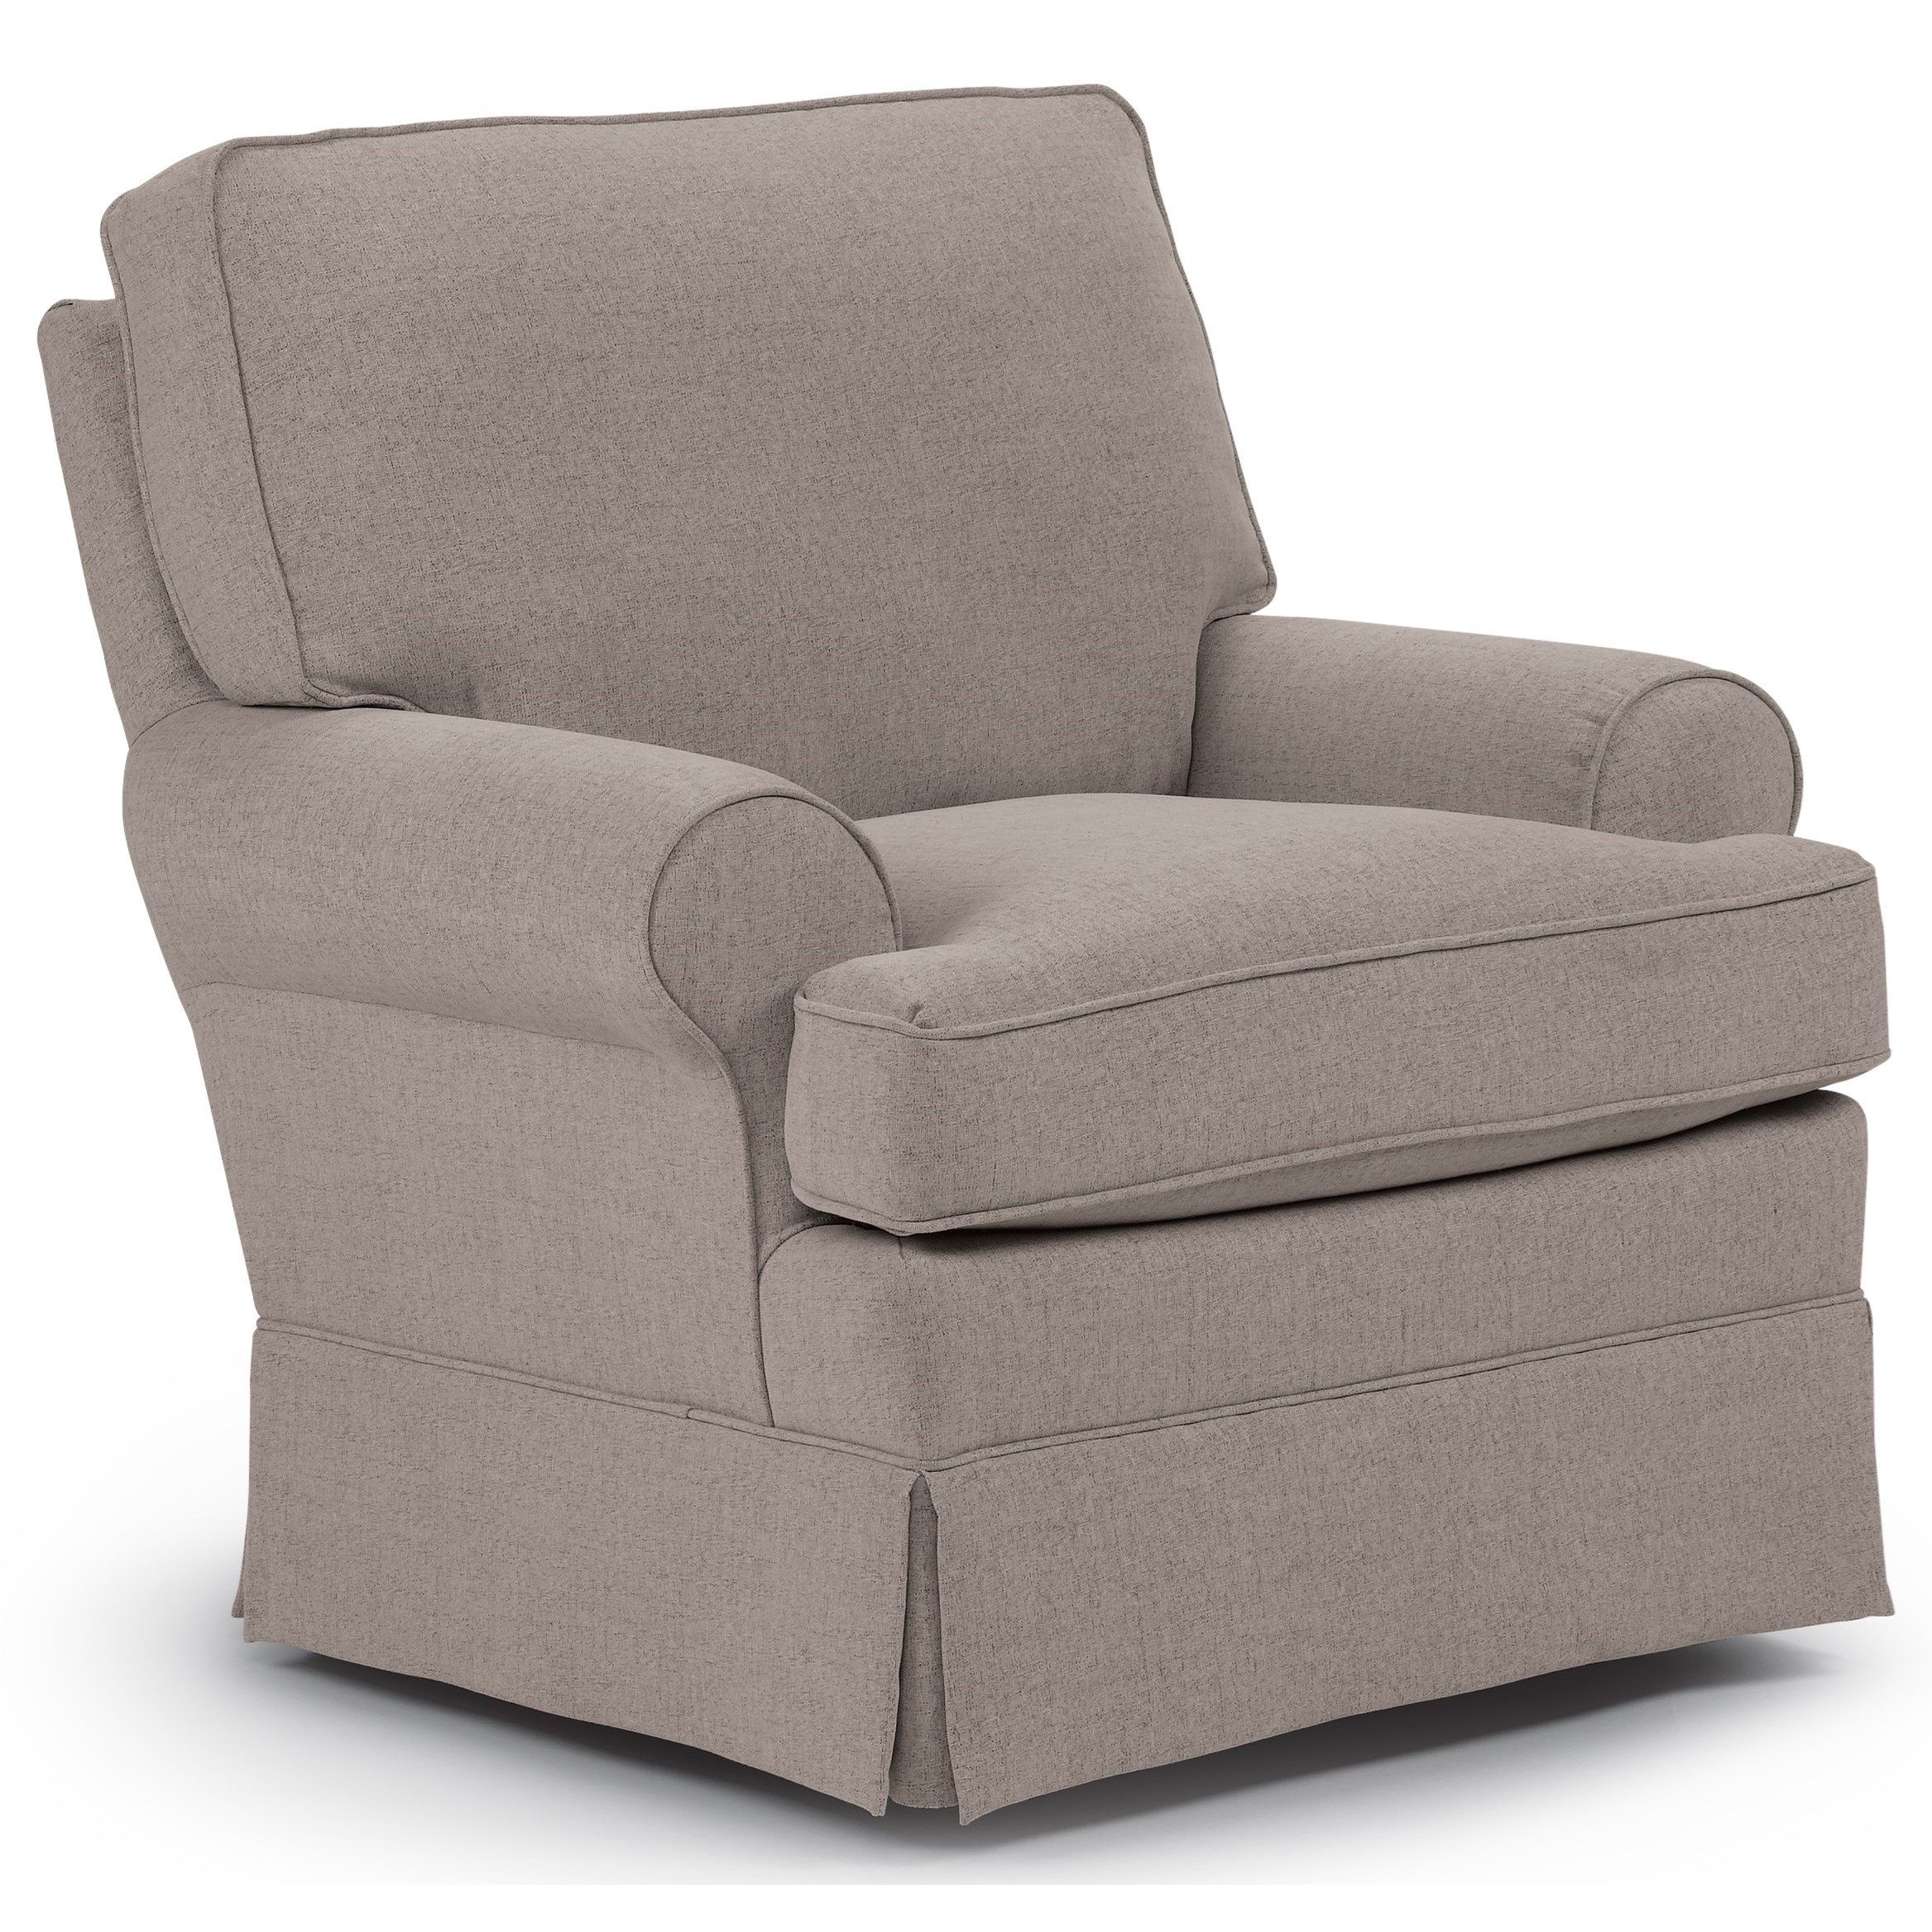 Best Home Furnishings Swivel Glide Chairs 1577 Quinn Swivel Glider Pertaining To Swivel Rocking Chairs (Photo 1 of 15)